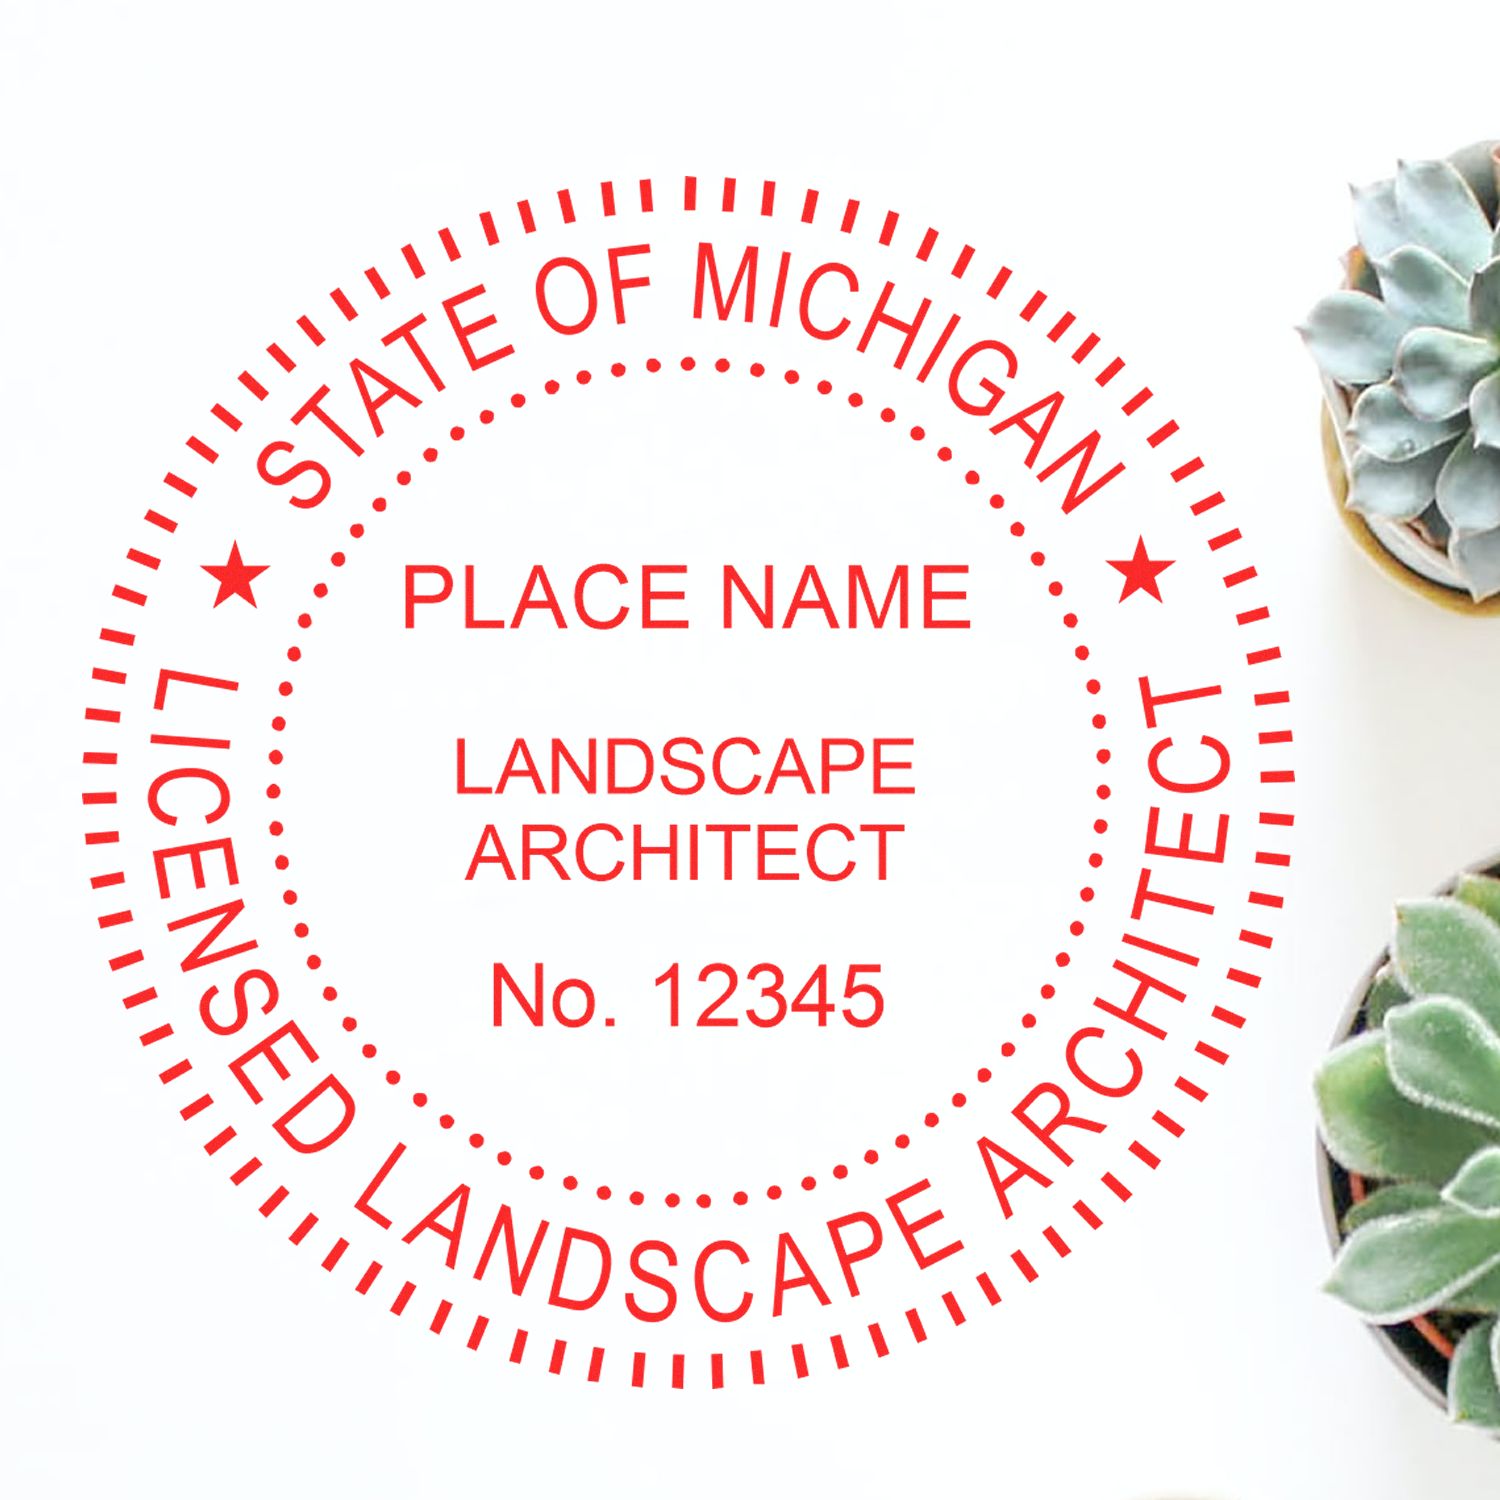 The Slim Pre-Inked Michigan Landscape Architect Seal Stamp stamp impression comes to life with a crisp, detailed photo on paper - showcasing true professional quality.